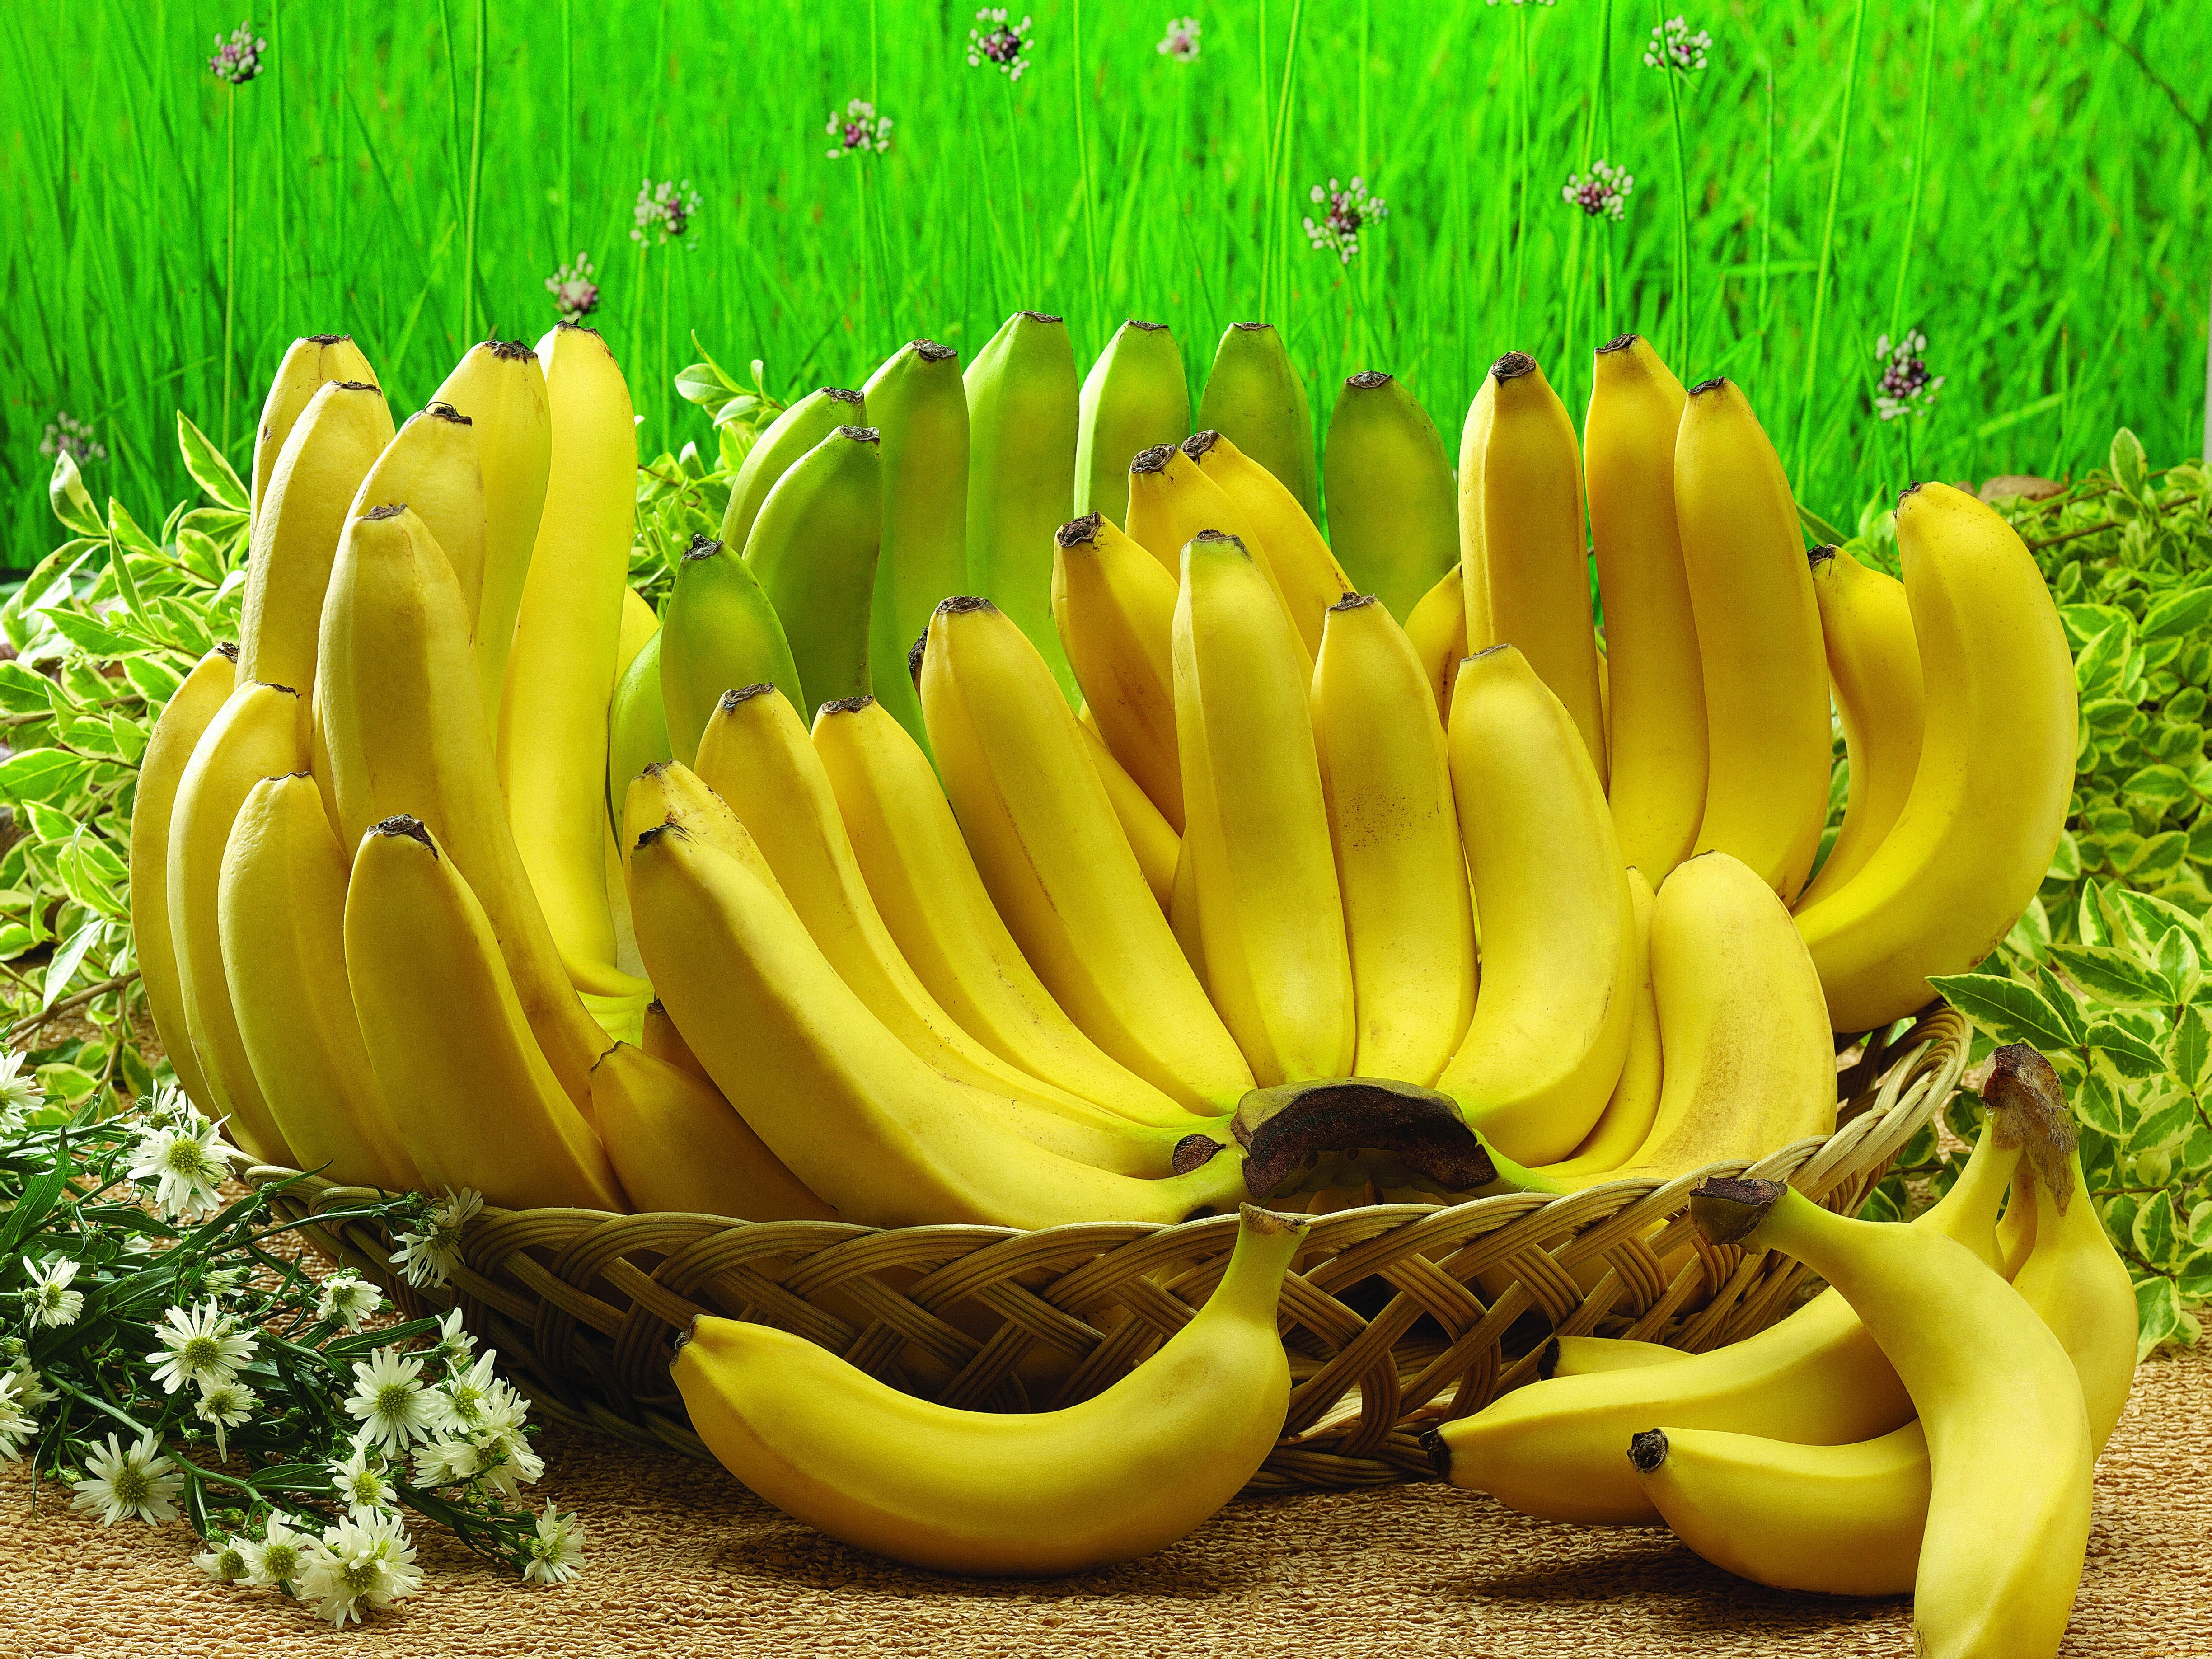 28 Banana HD Wallpapers | Backgrounds - Wallpaper Abyss